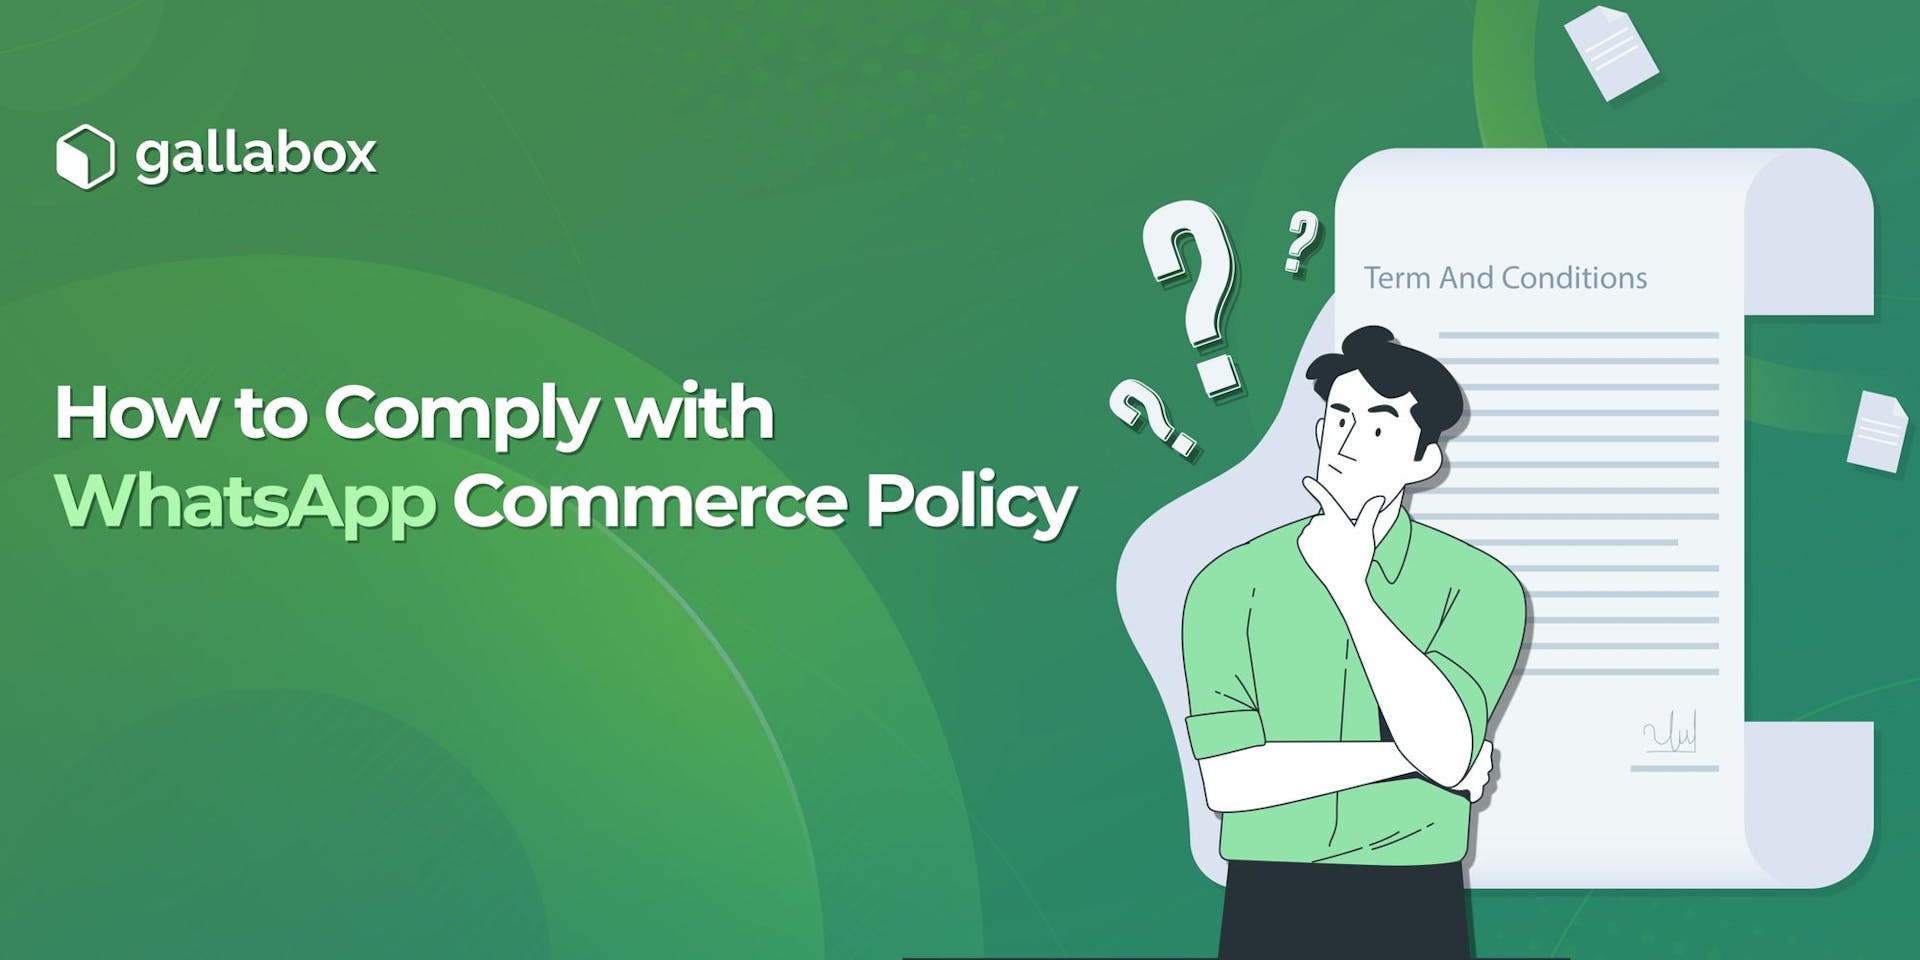 How to Comply with WhatsApp Commerce Policy